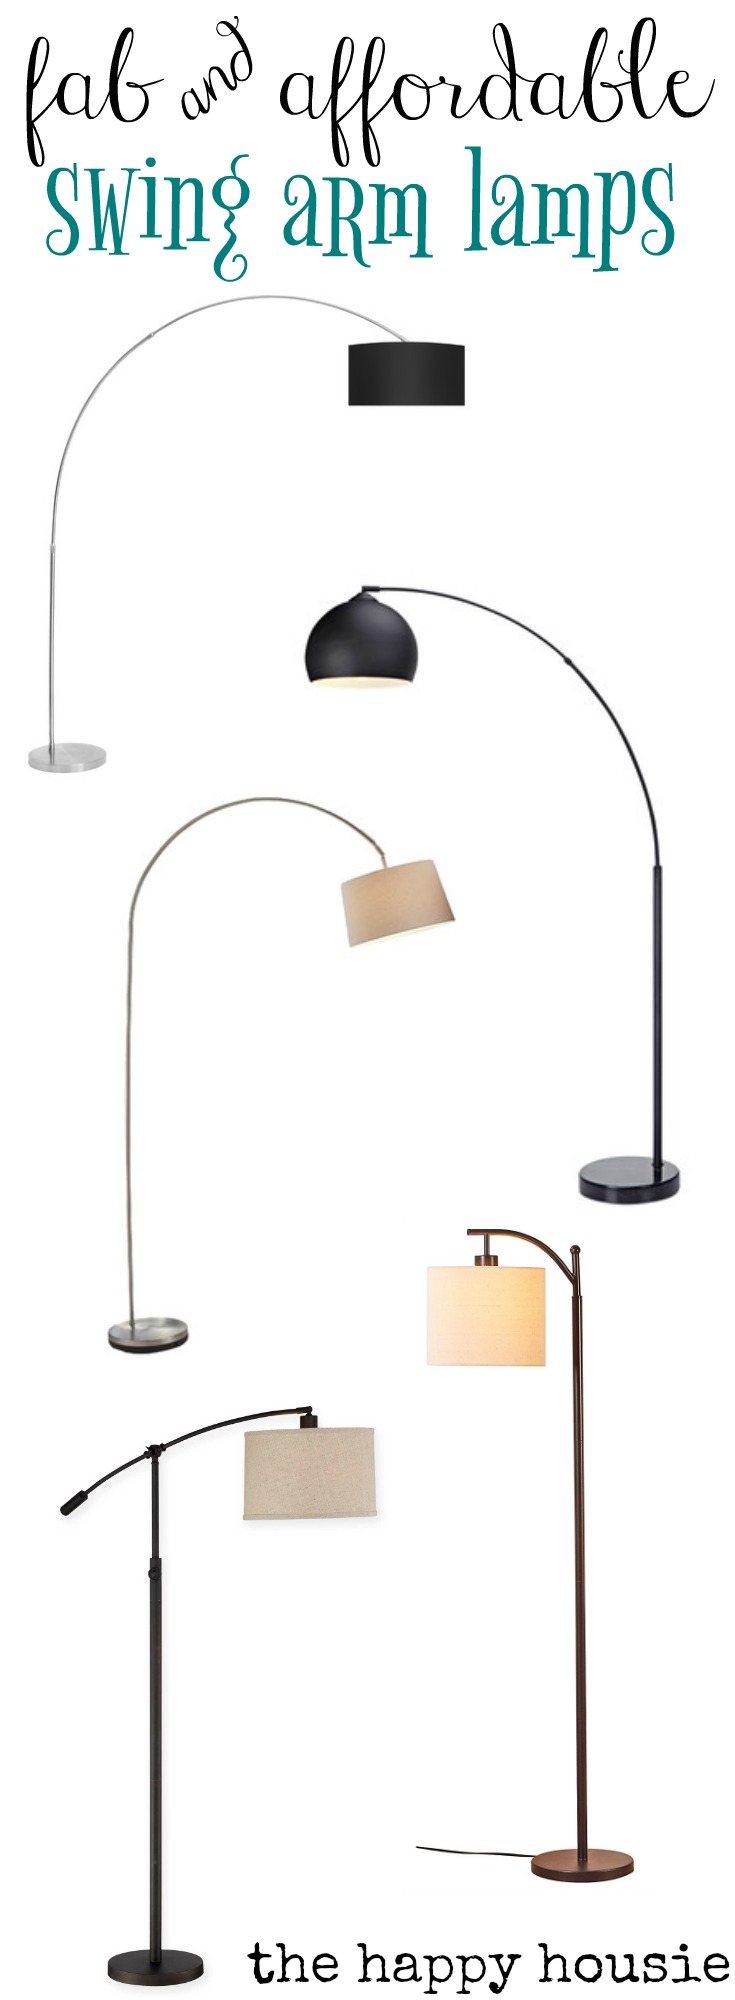 Fab and Affordable Swing Arm Lamps poster.